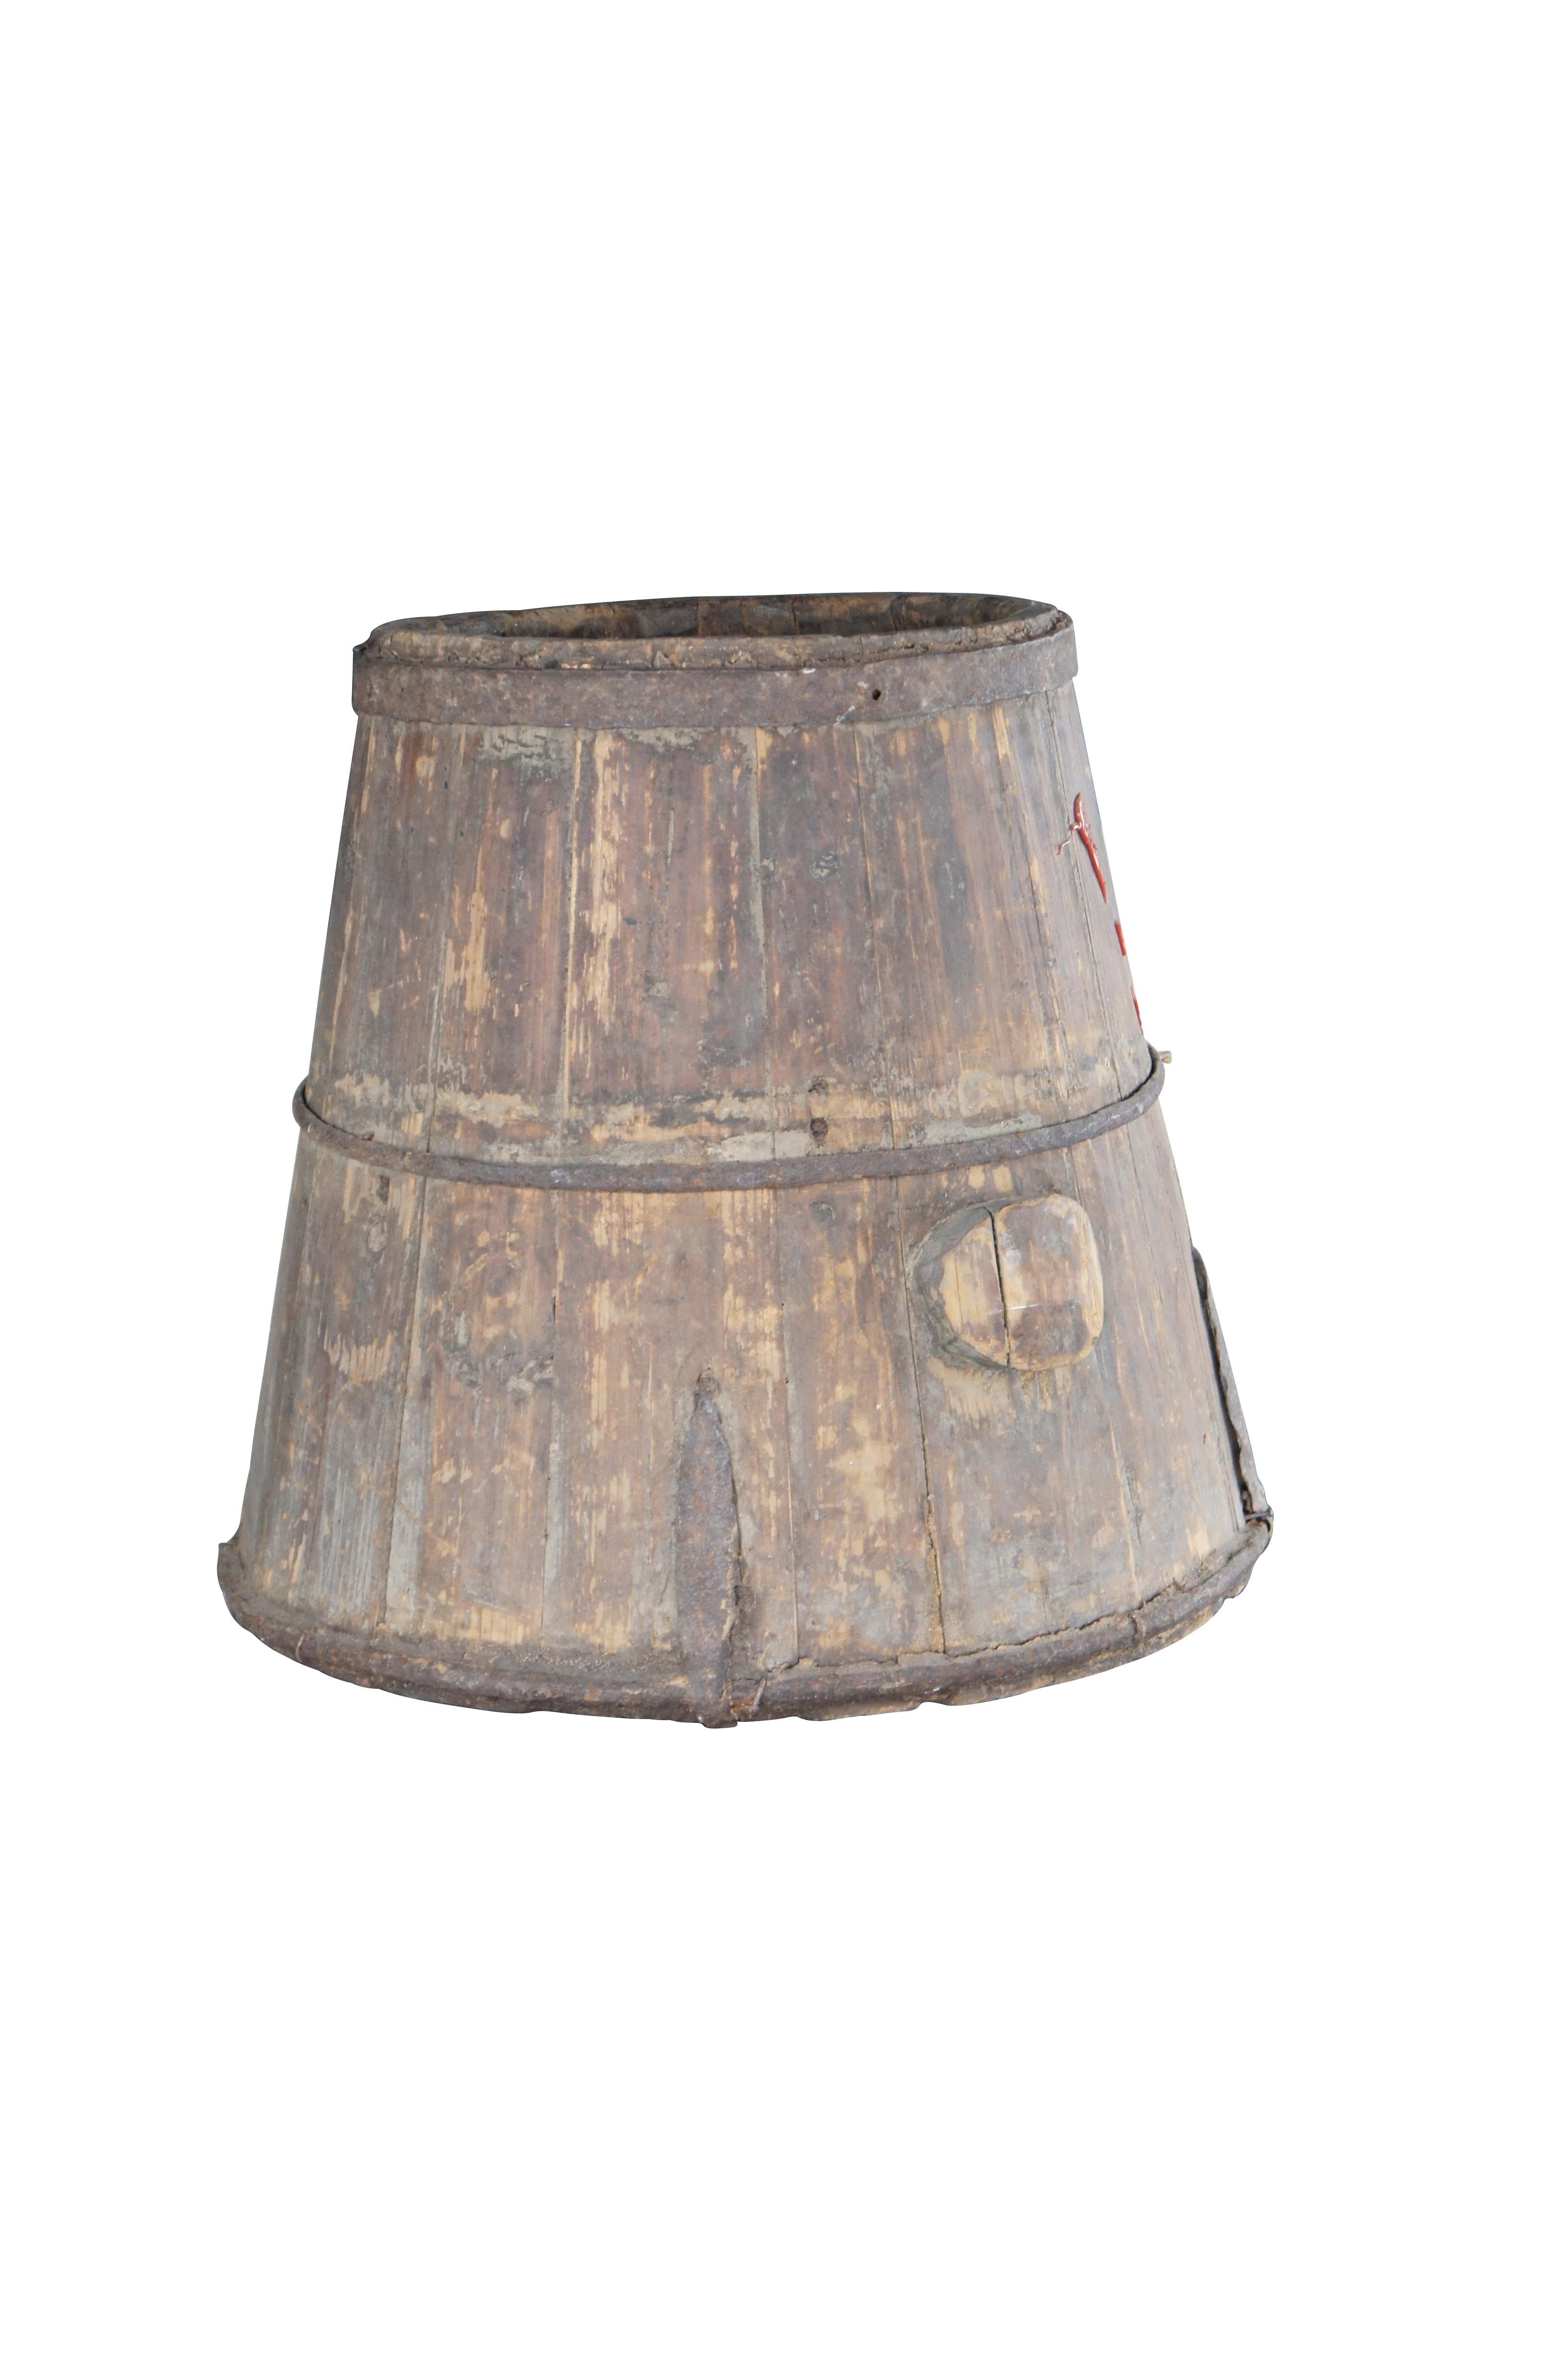 Chinese Shanxi barrel form banded iron wooden rice measure, bucket or basket. Aged with rustic patina and wax import stamp. Circa second half 20th century.

Dimensions:
16